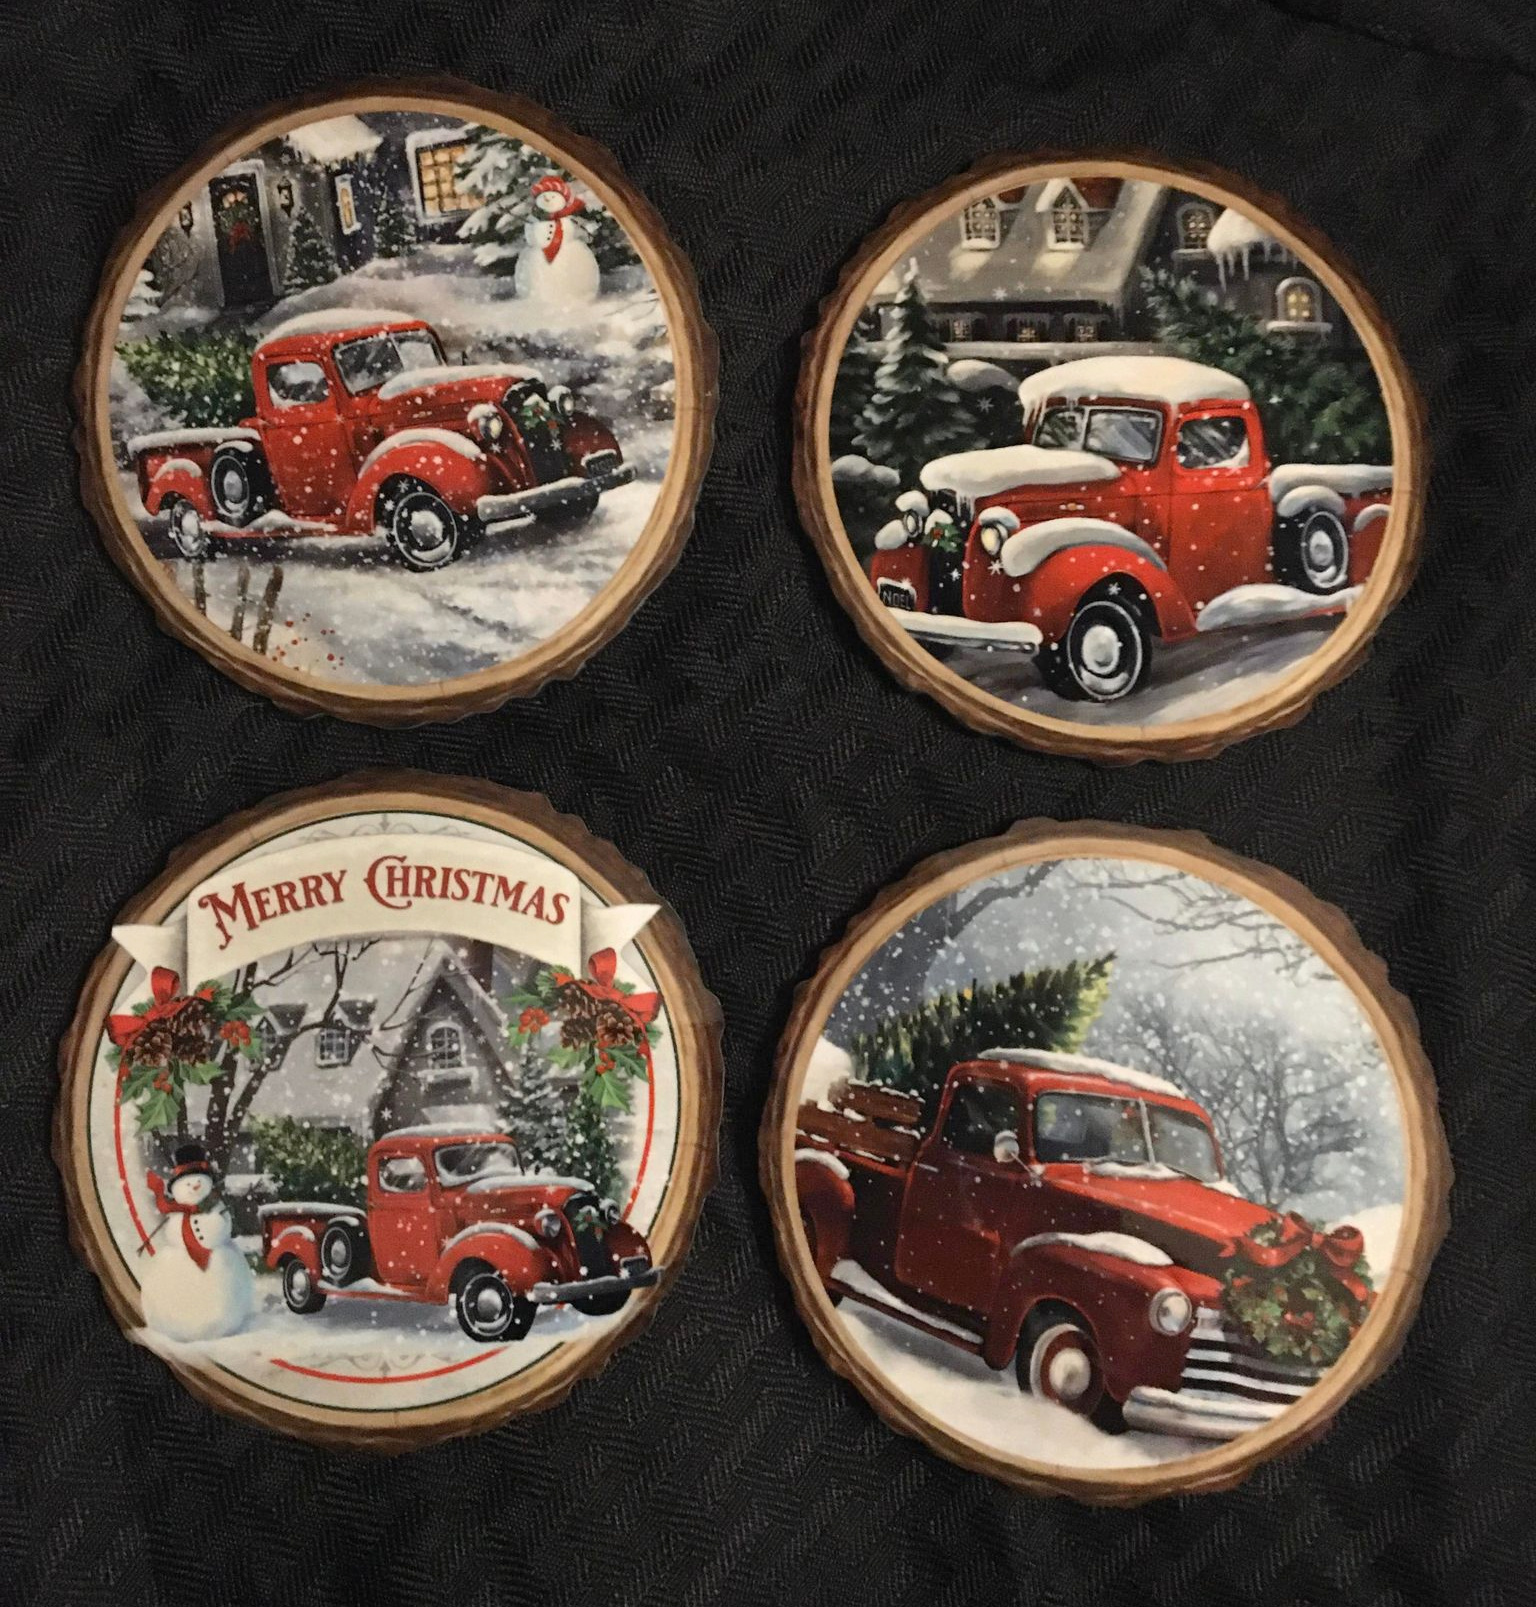 Coasters made with sublimation printing